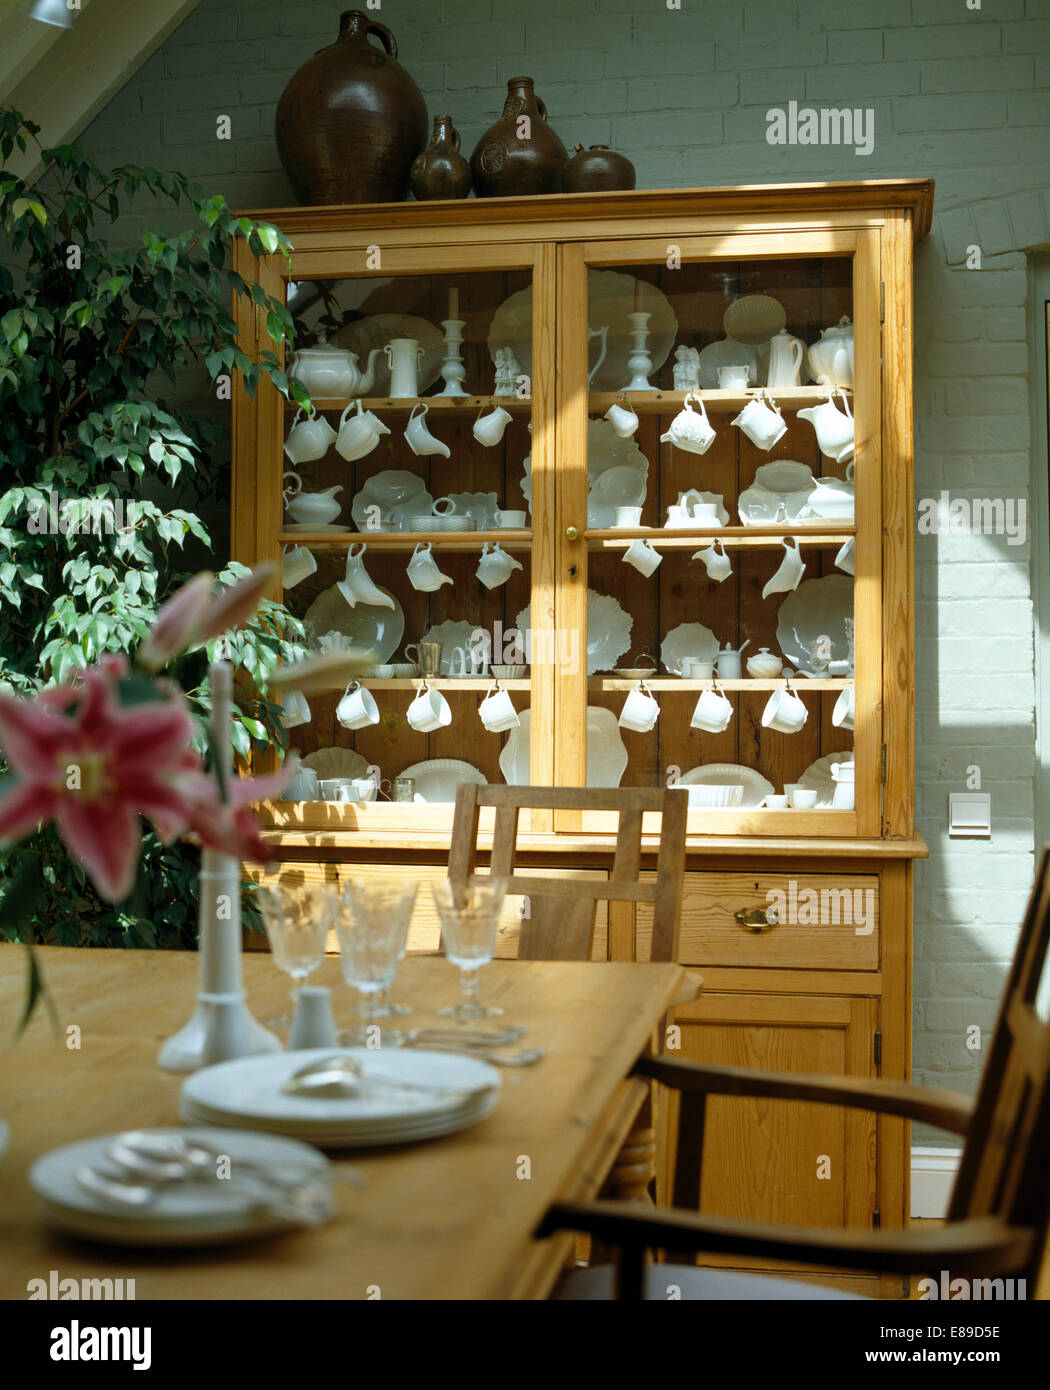 Old Pine Dresser With Collection Of White China Behind Glass Doors